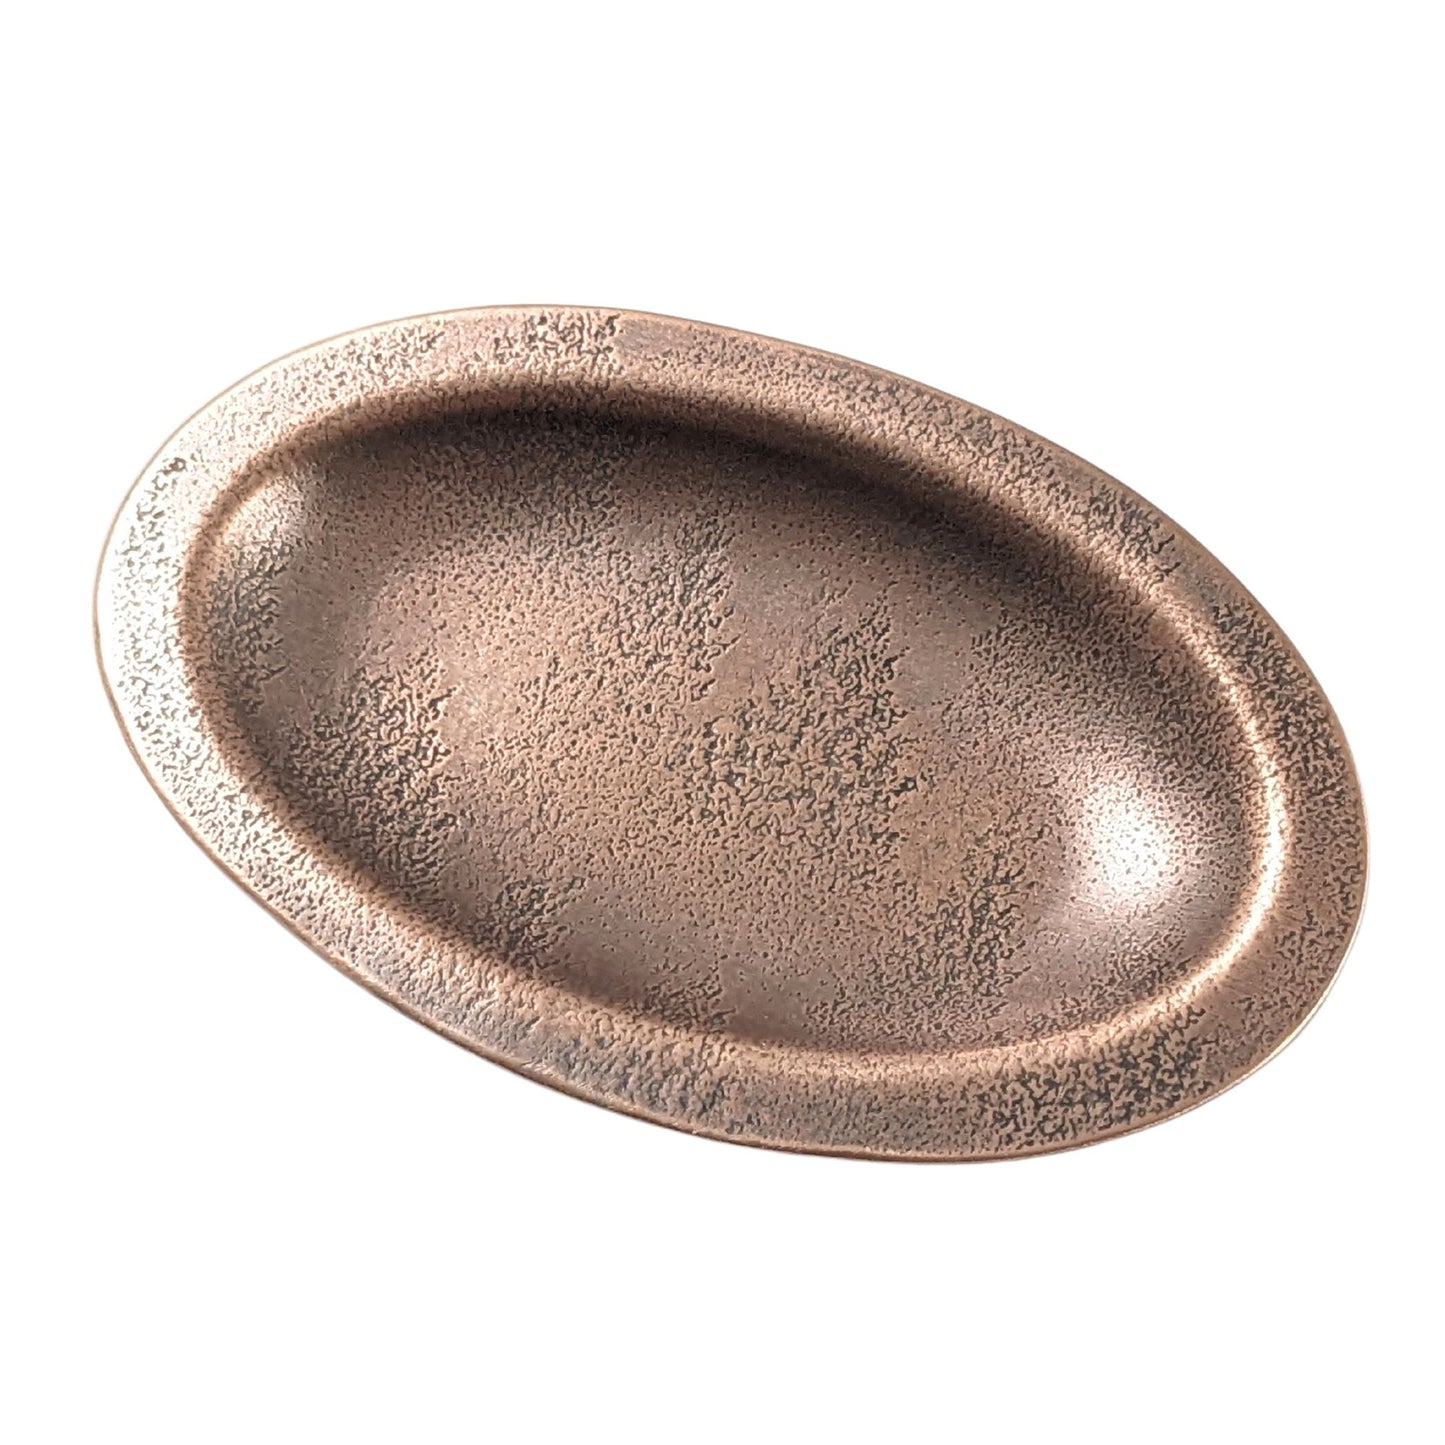 An oval copper ring dish with a raised edge. The dish has an impressed